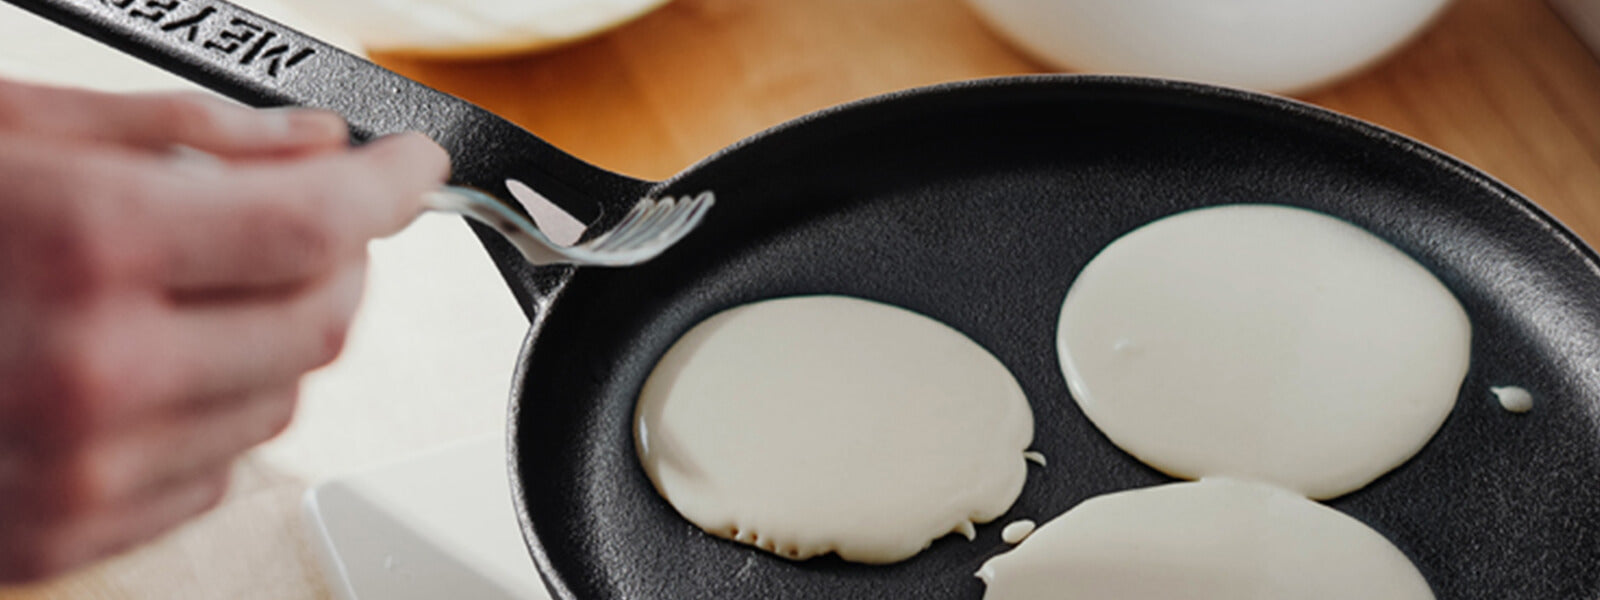 Myths About Cast Iron Cookware Busted